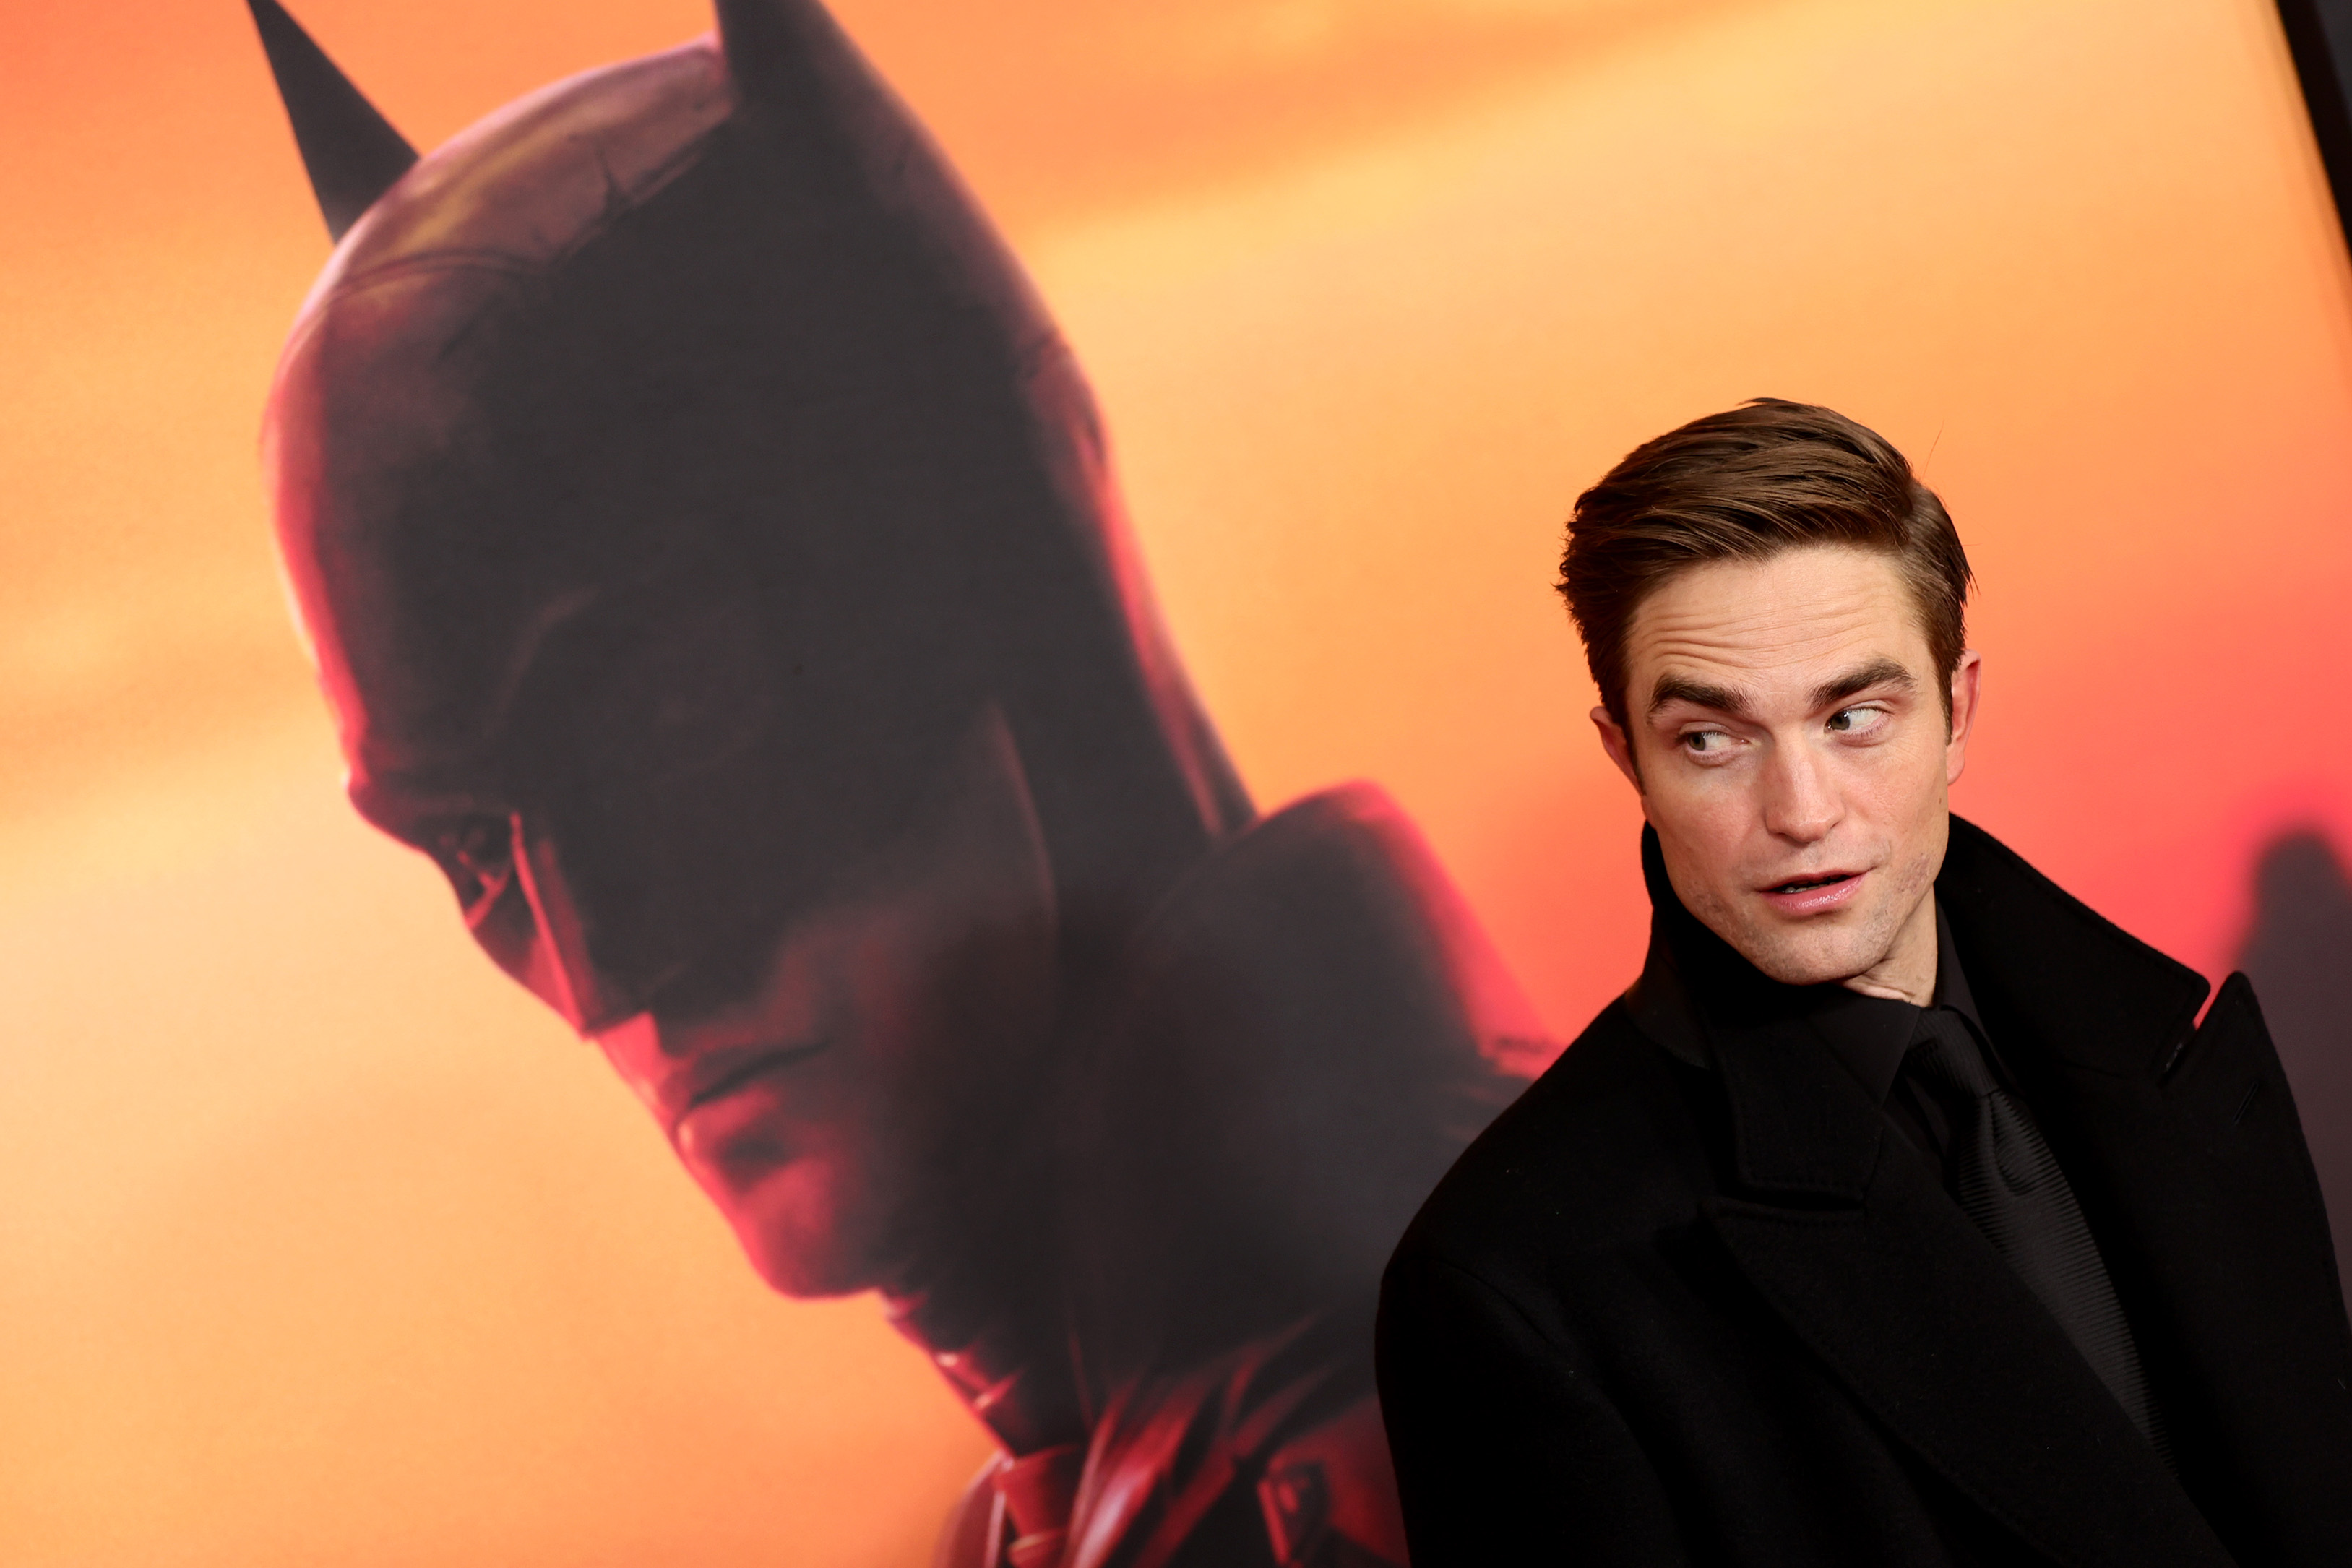 'The Batman' star Robert Pattinson stands in front of a poster for the film wearing a black coat over a black button-up shirt and black tie.